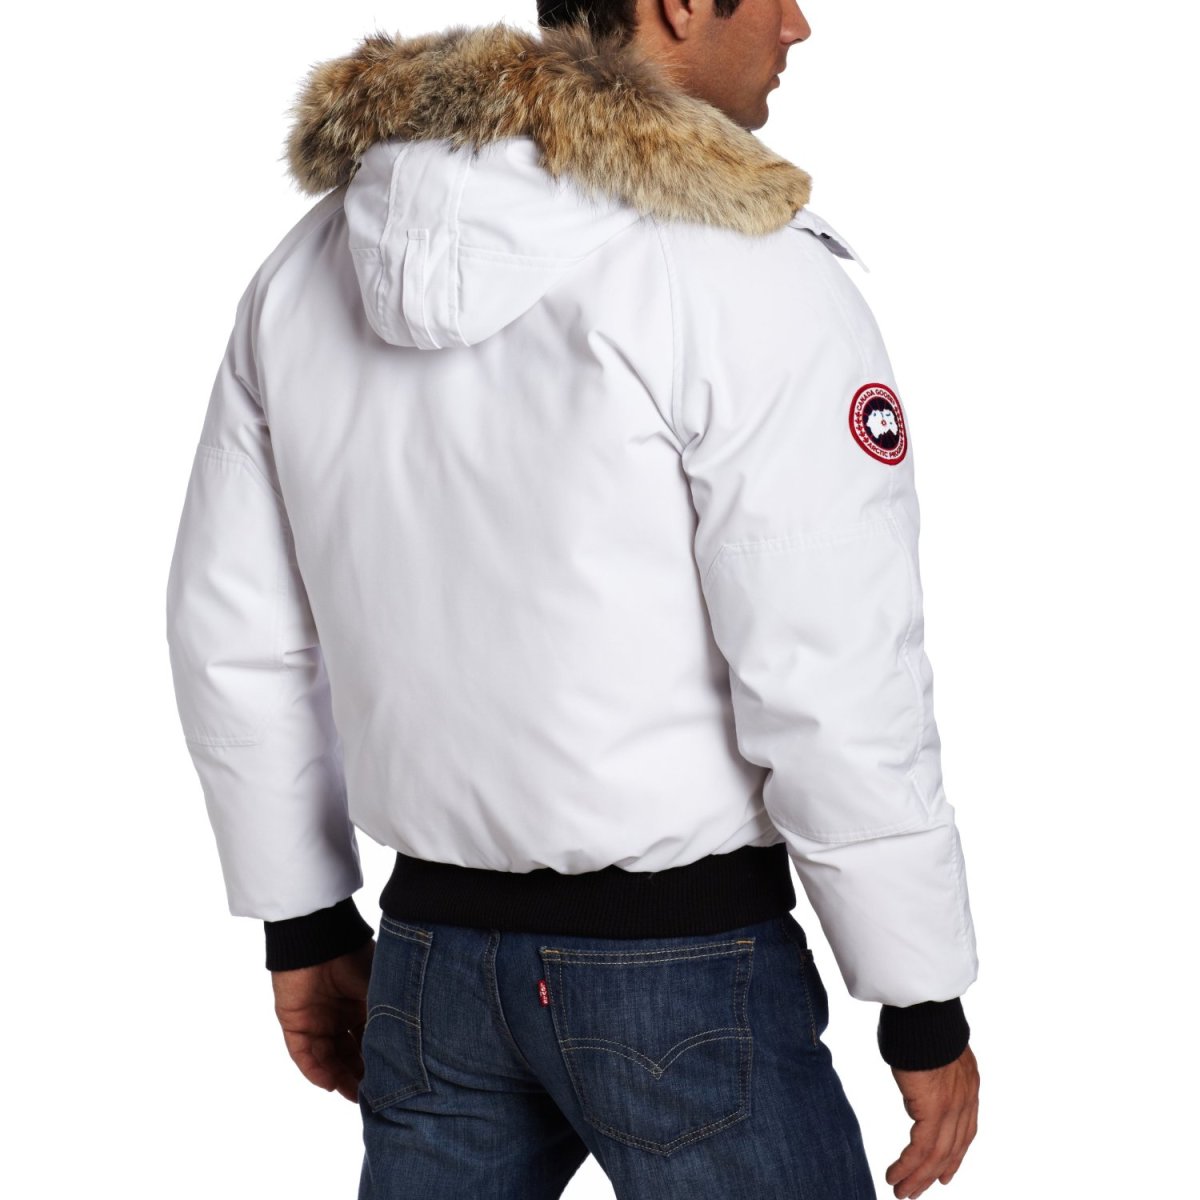 Canada Goose cheap - A Complete Review Of The Chilliwack Bomber Jacket By Canada Goose